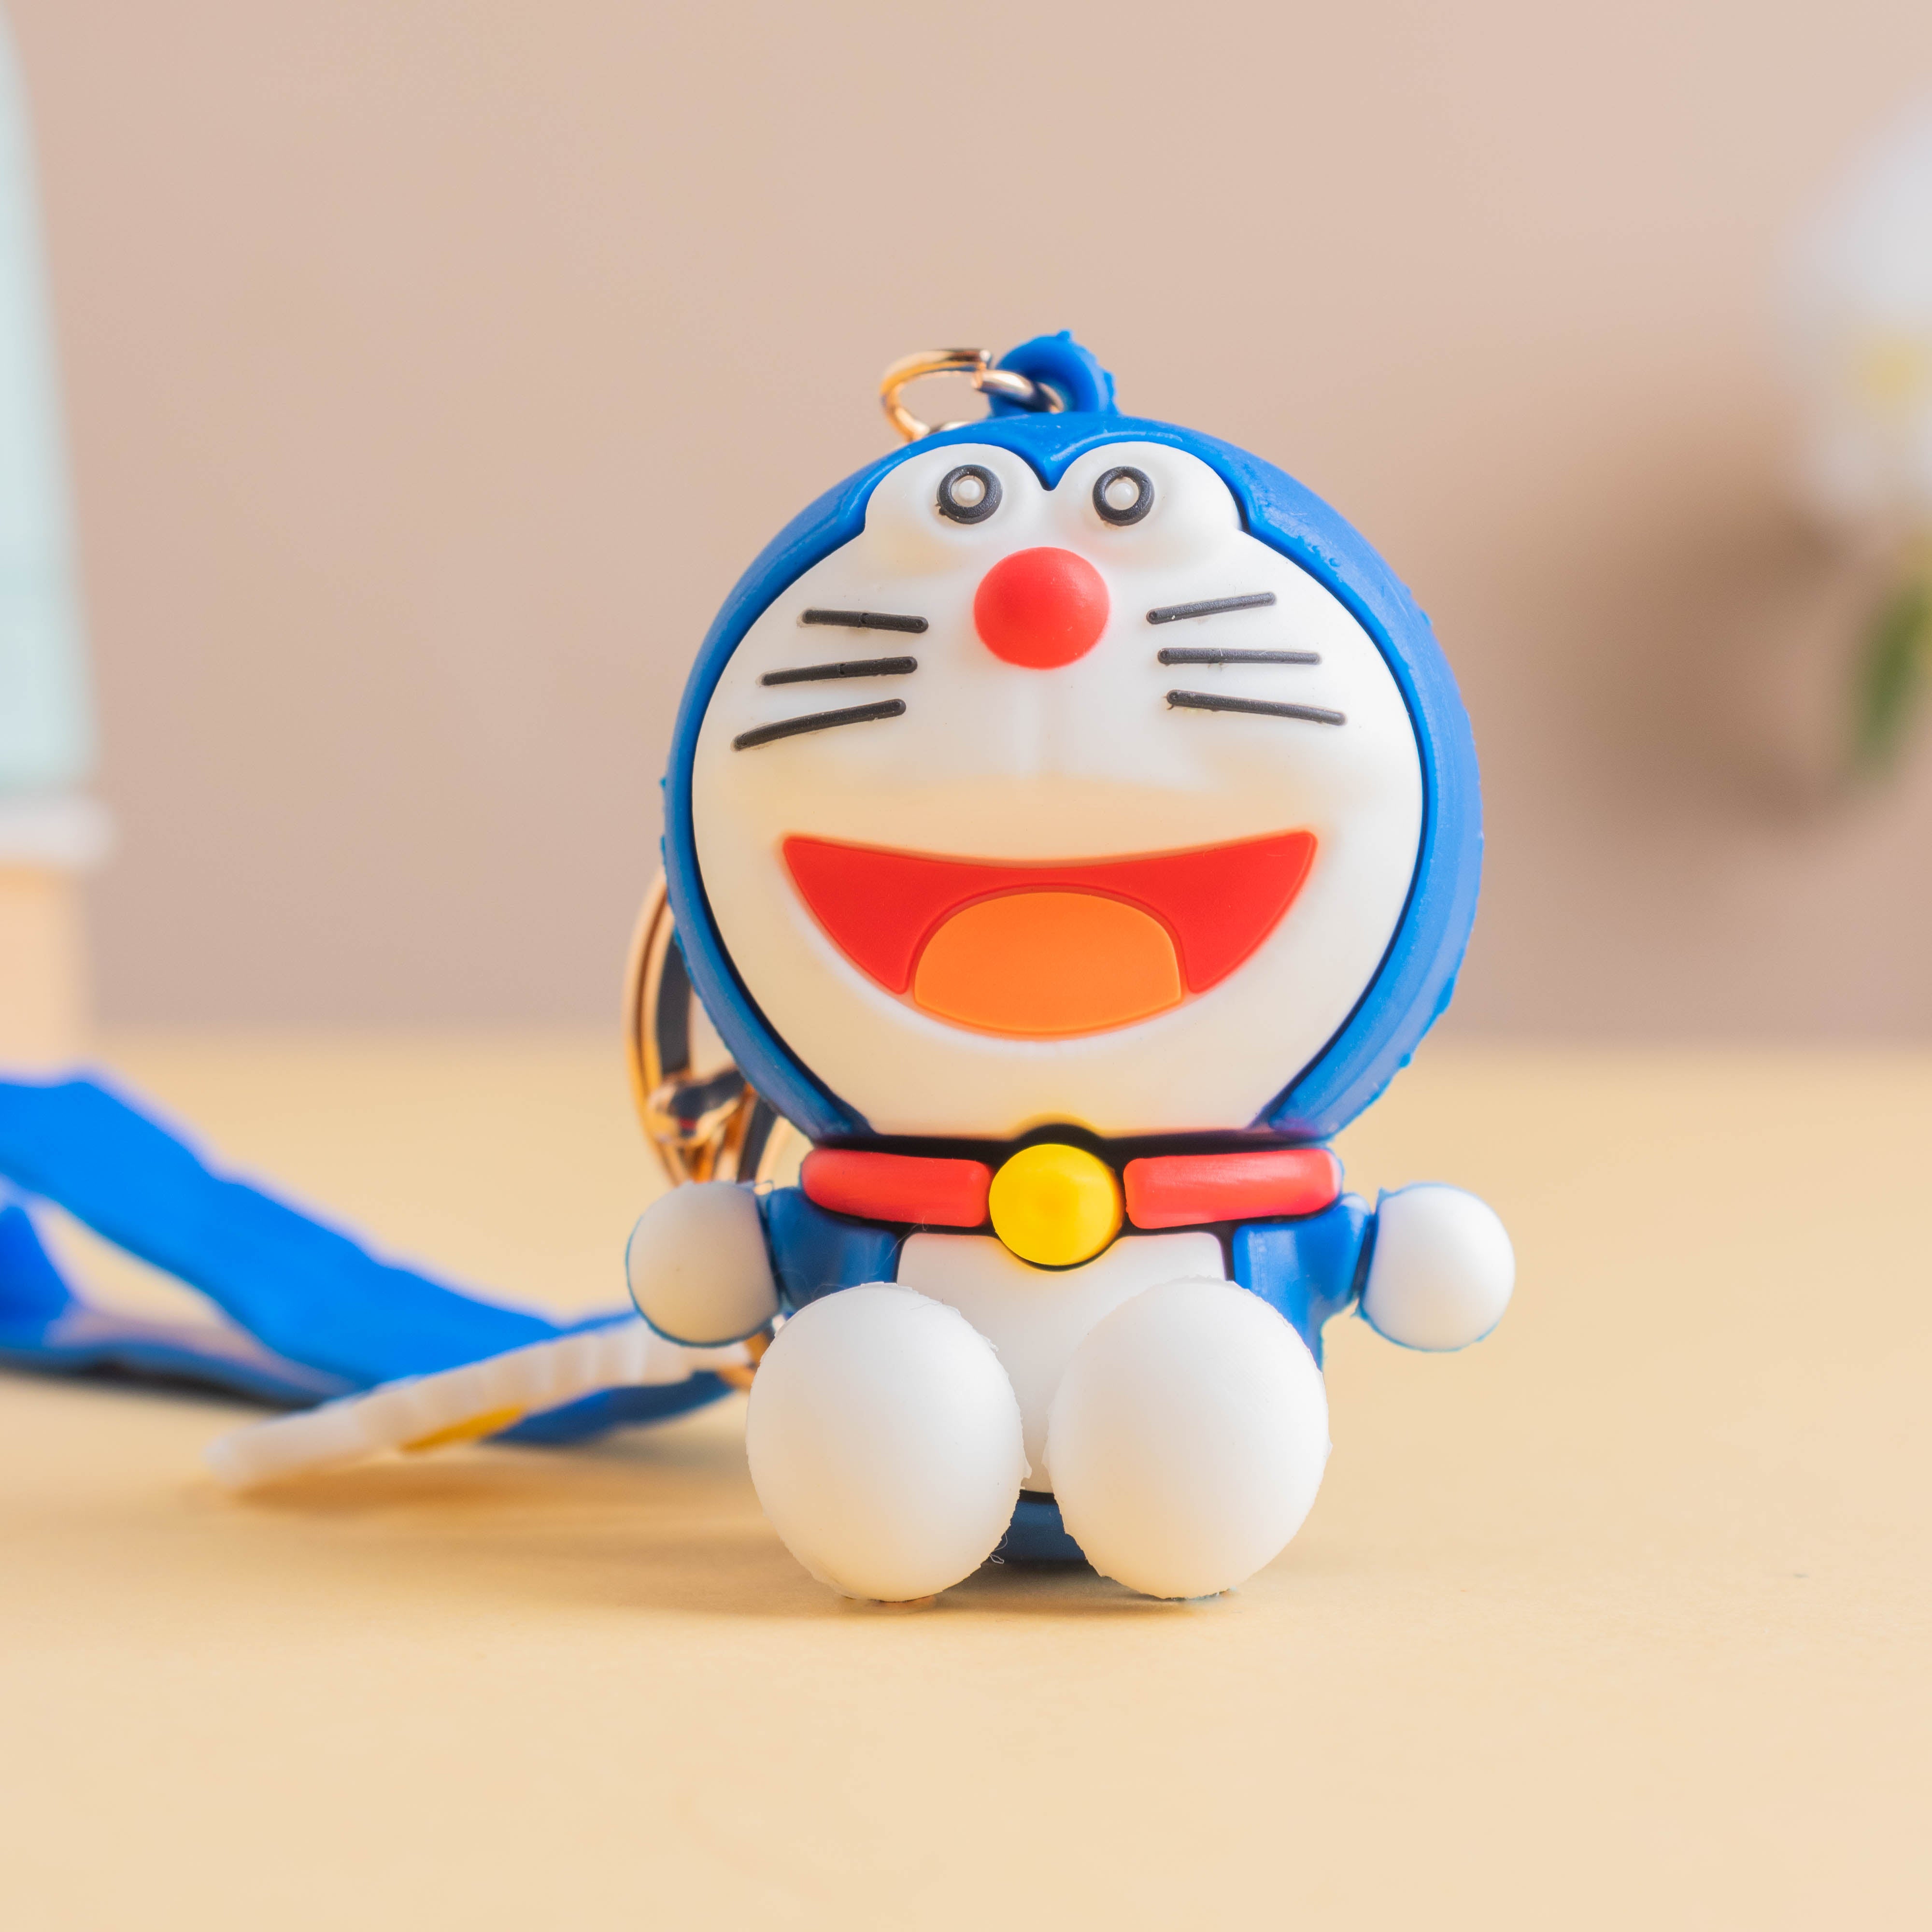 JINZHOUFZ KeychainCartoon Doraemon, Creative Decoration Pendant, Suitable  for Car Keychains, Home Gifts, Birthday Gifts, Laugh While Sitting,  6.49x1.57x1.37inches; 1.90ounces : Amazon.in: Home & Kitchen